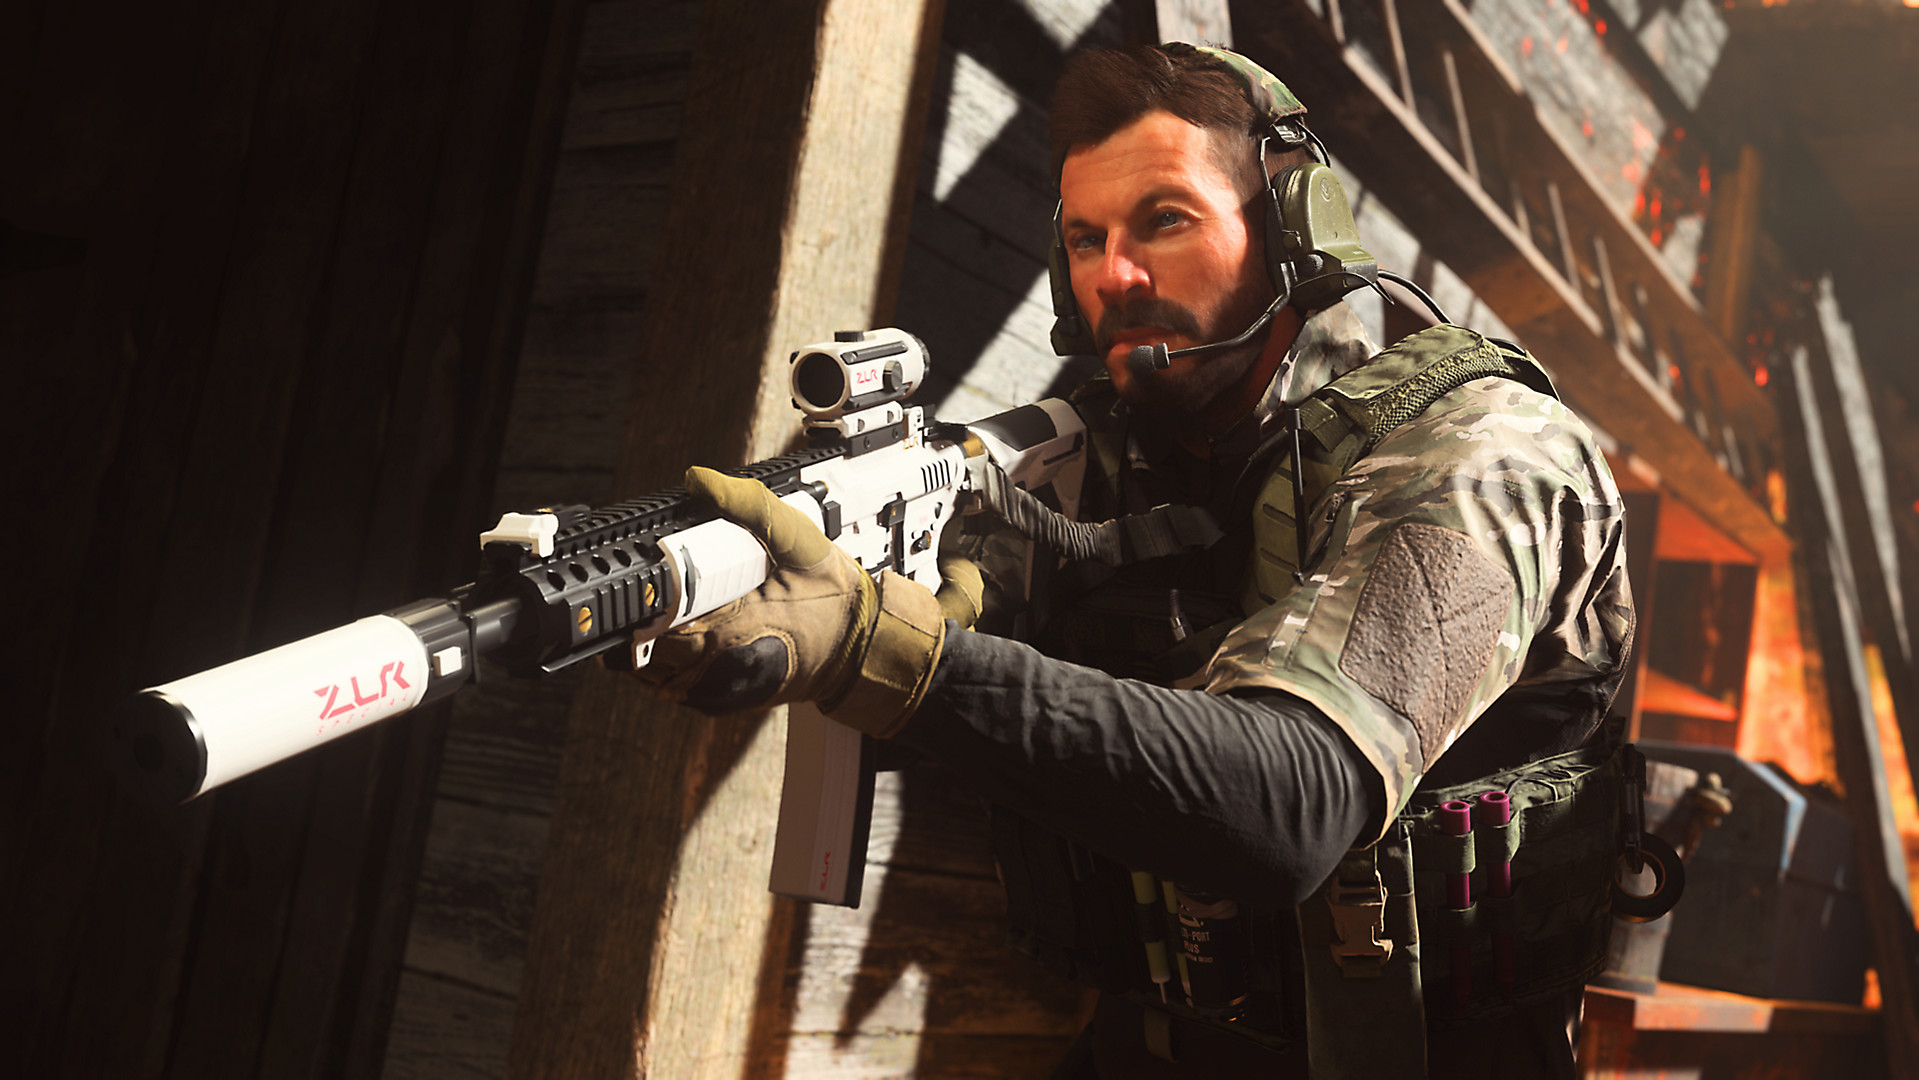 Call of Duty: Warzone is headed to mobile devices